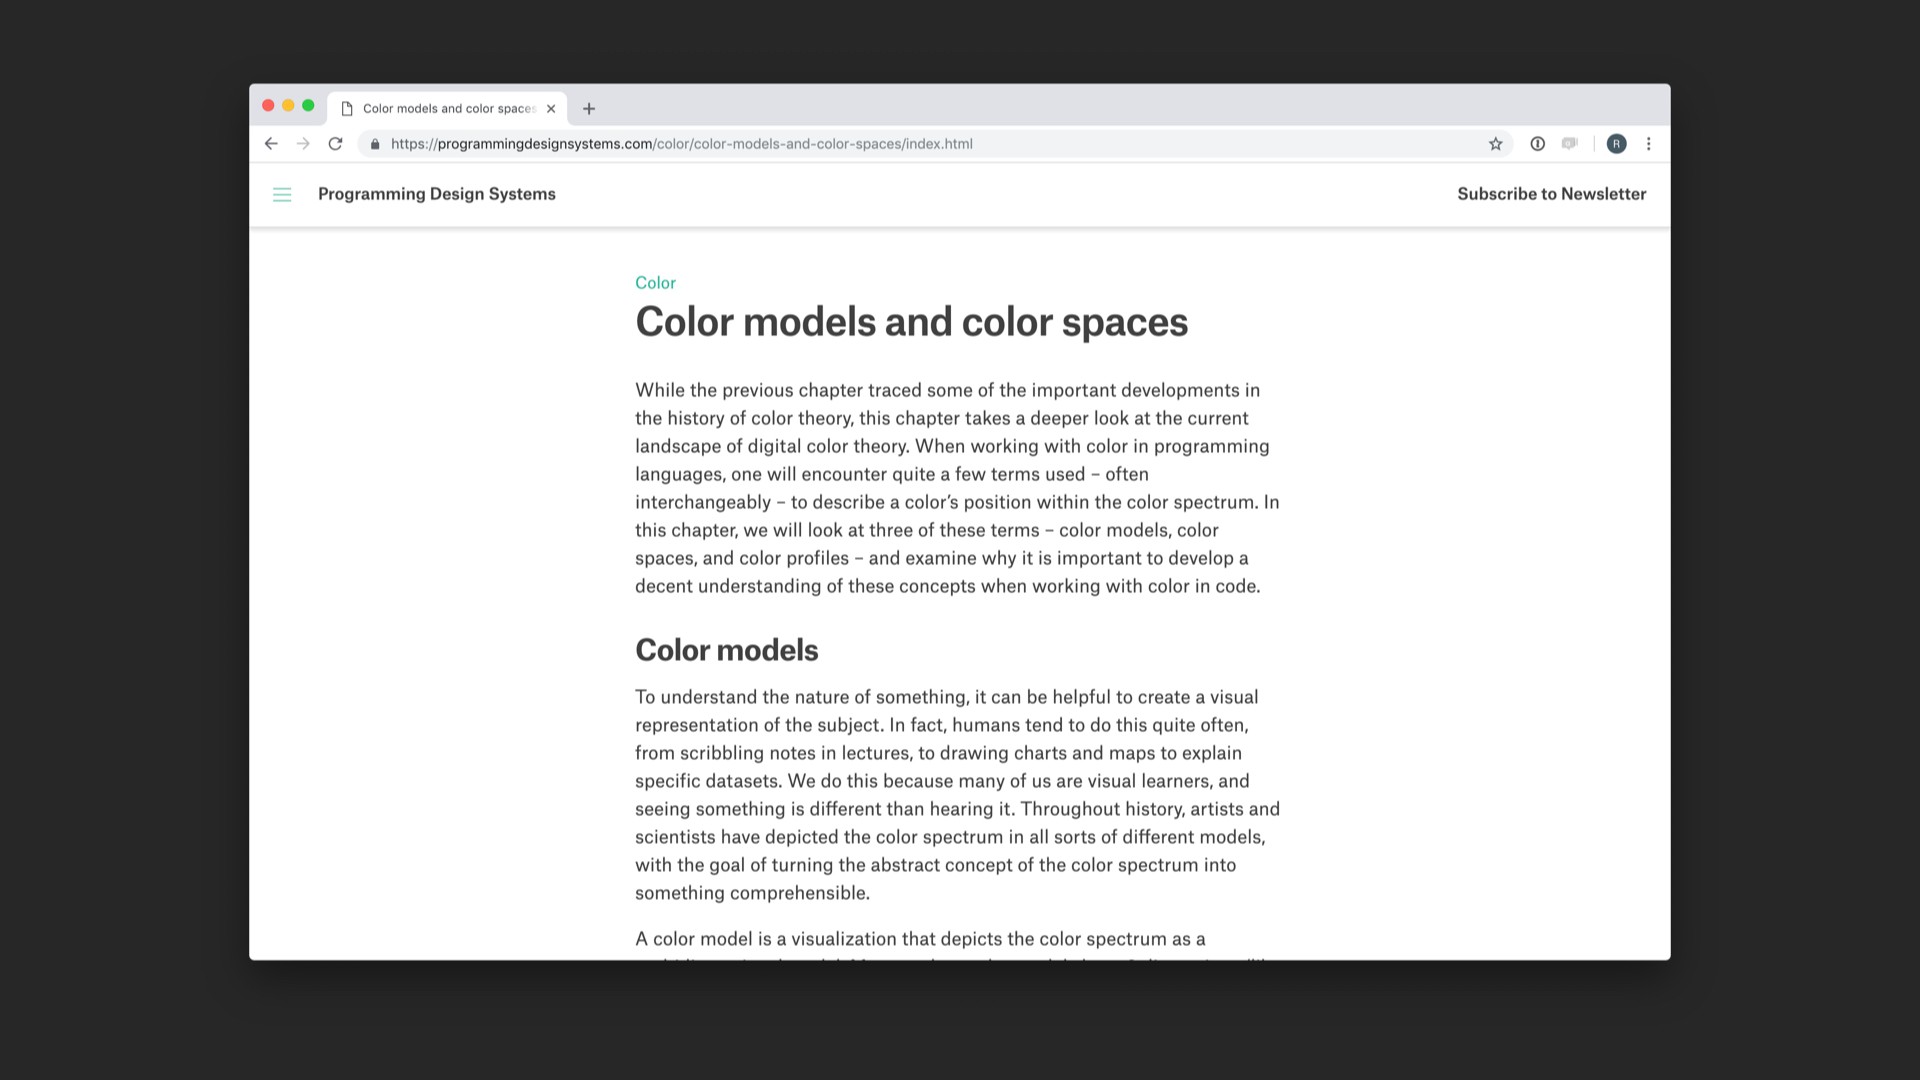 Screenshot of 'Color models and color spaces' chapter of referenced website.